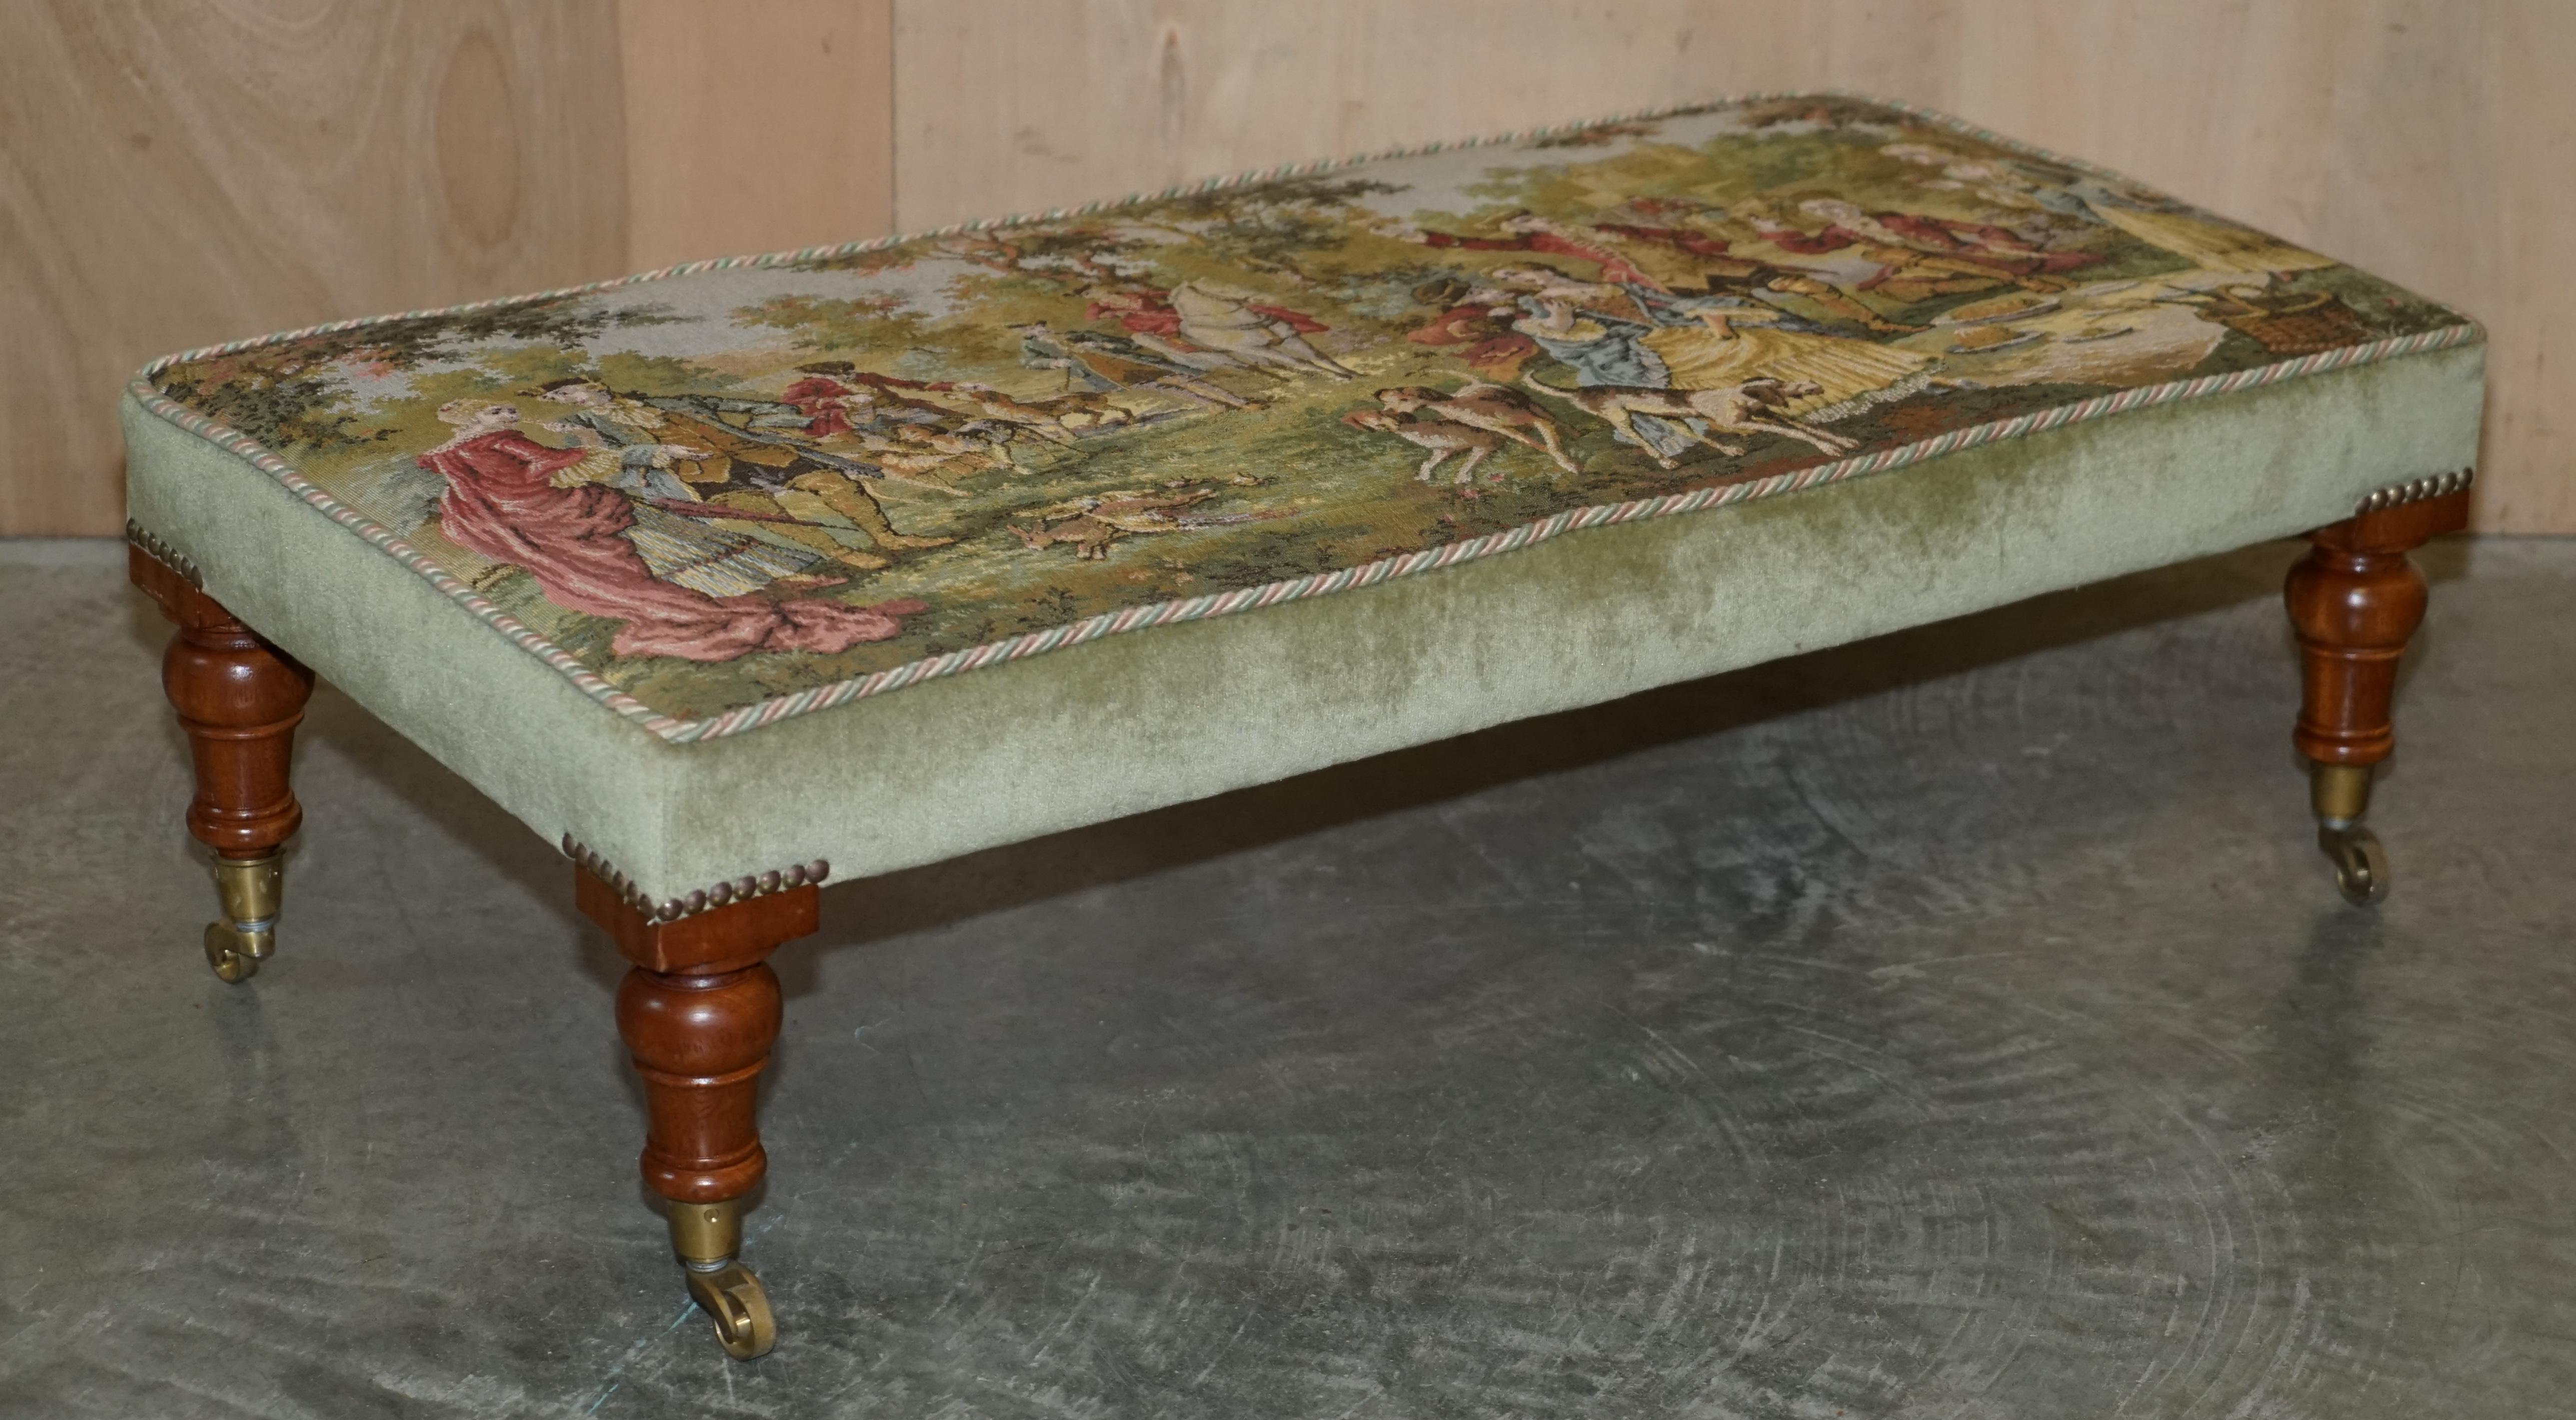 We are is delighted to offer for sale this lovely hand Embroidered mahogany framed William & Mary style Victorian footstool or ottoman which is part of a suite

This stool is part of of a suite, I have a matching footstool which is around half the